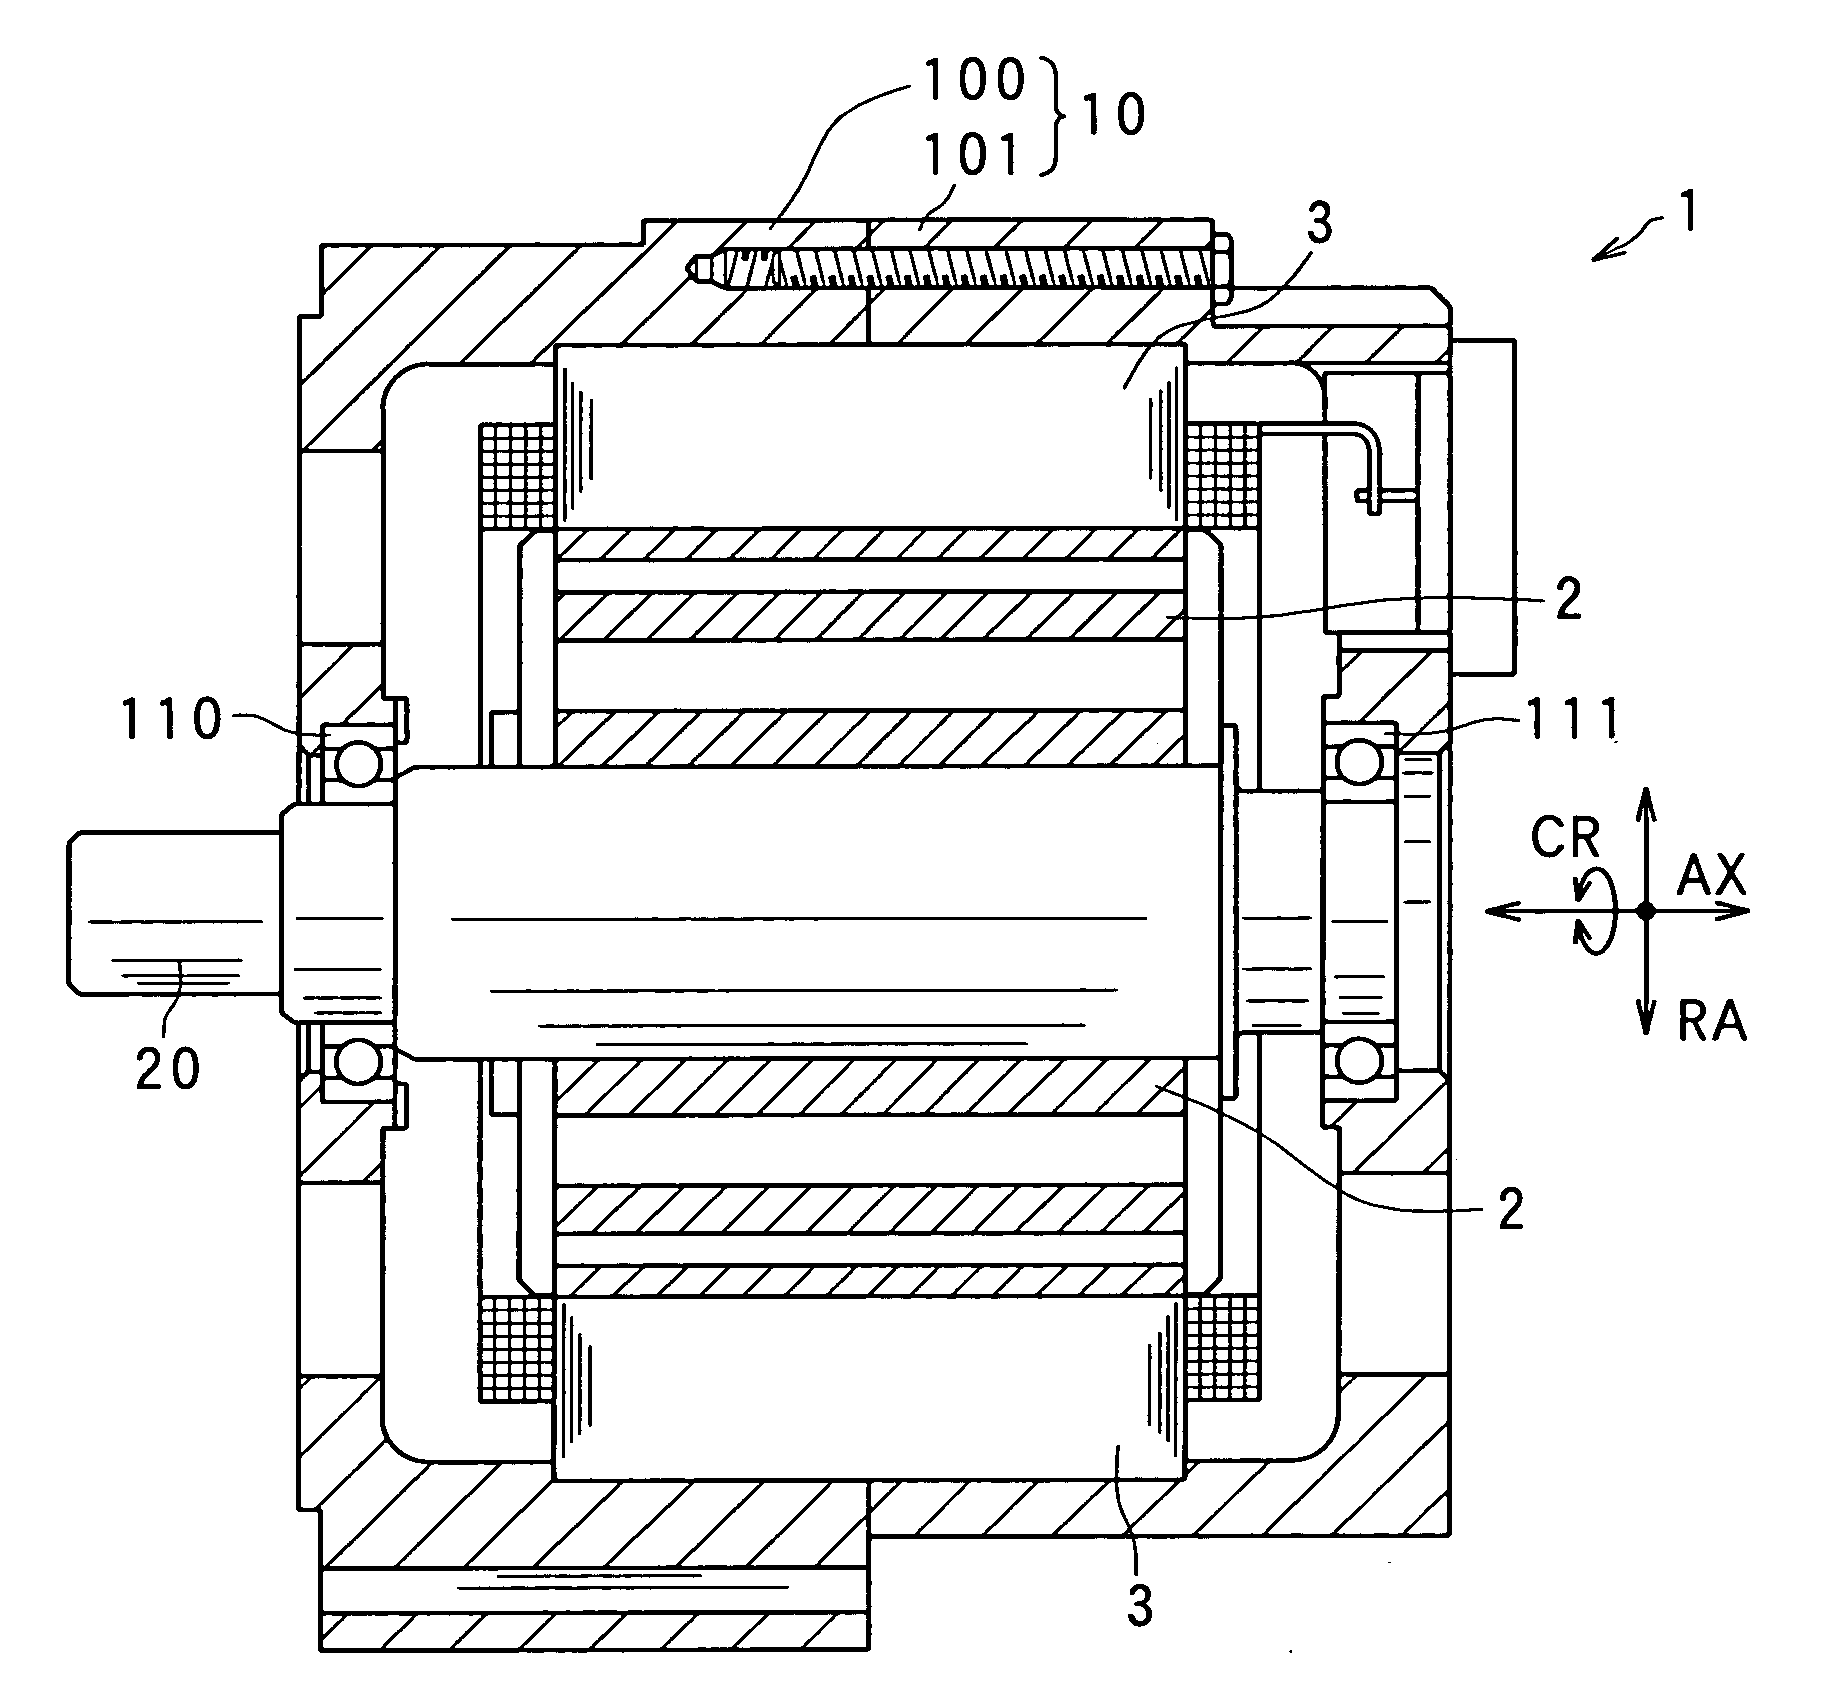 Method of manufacturing coil for stators mounted in rotary electric machines